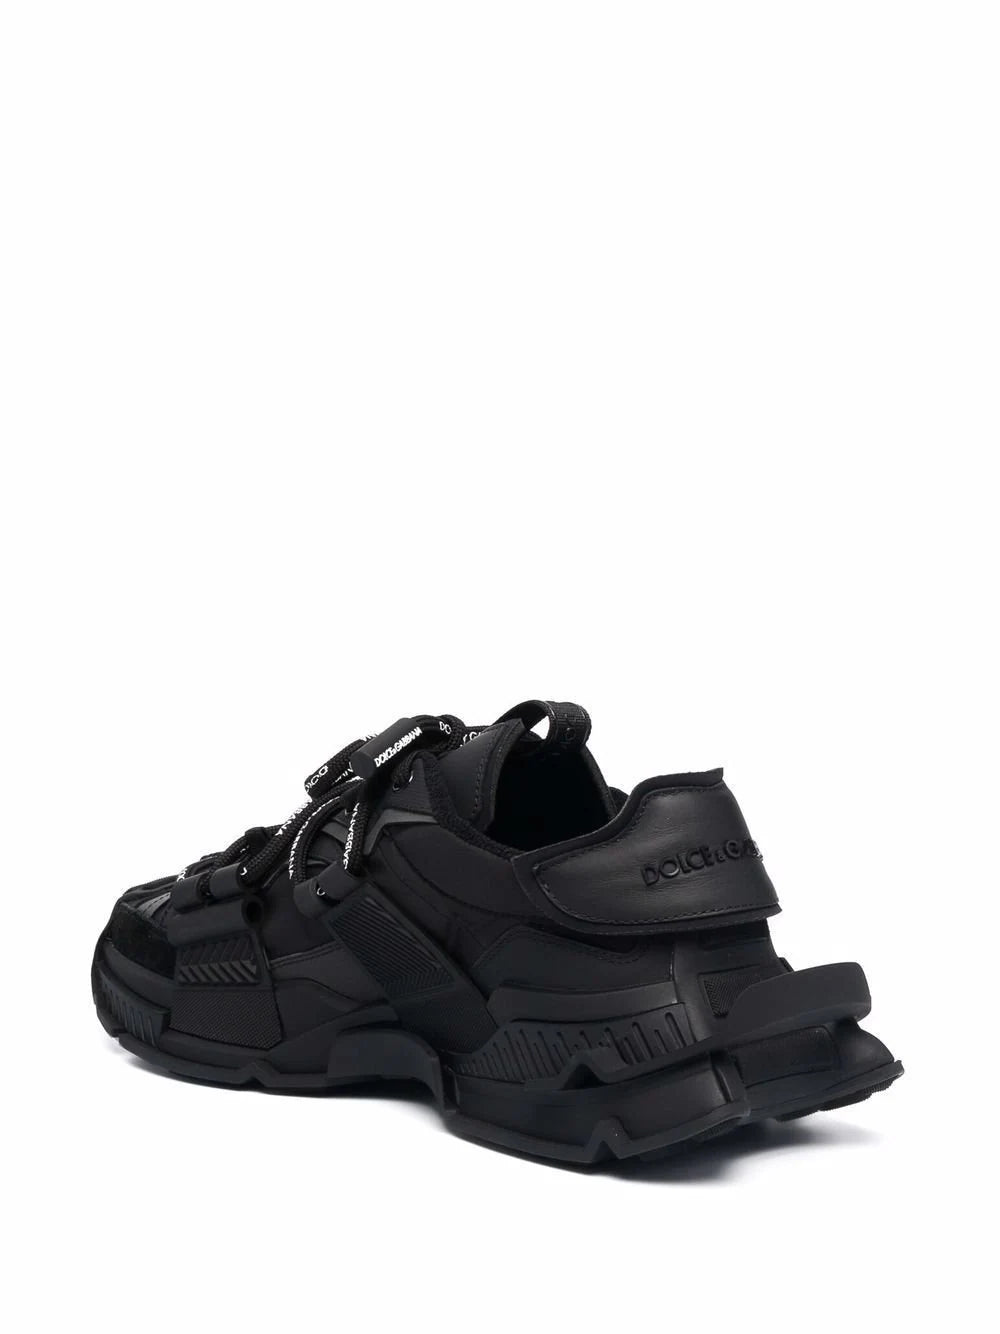 Shoellist | DOLCE AND GABBANA HYBRID TRAINERS – Shoellist | Catch your ...